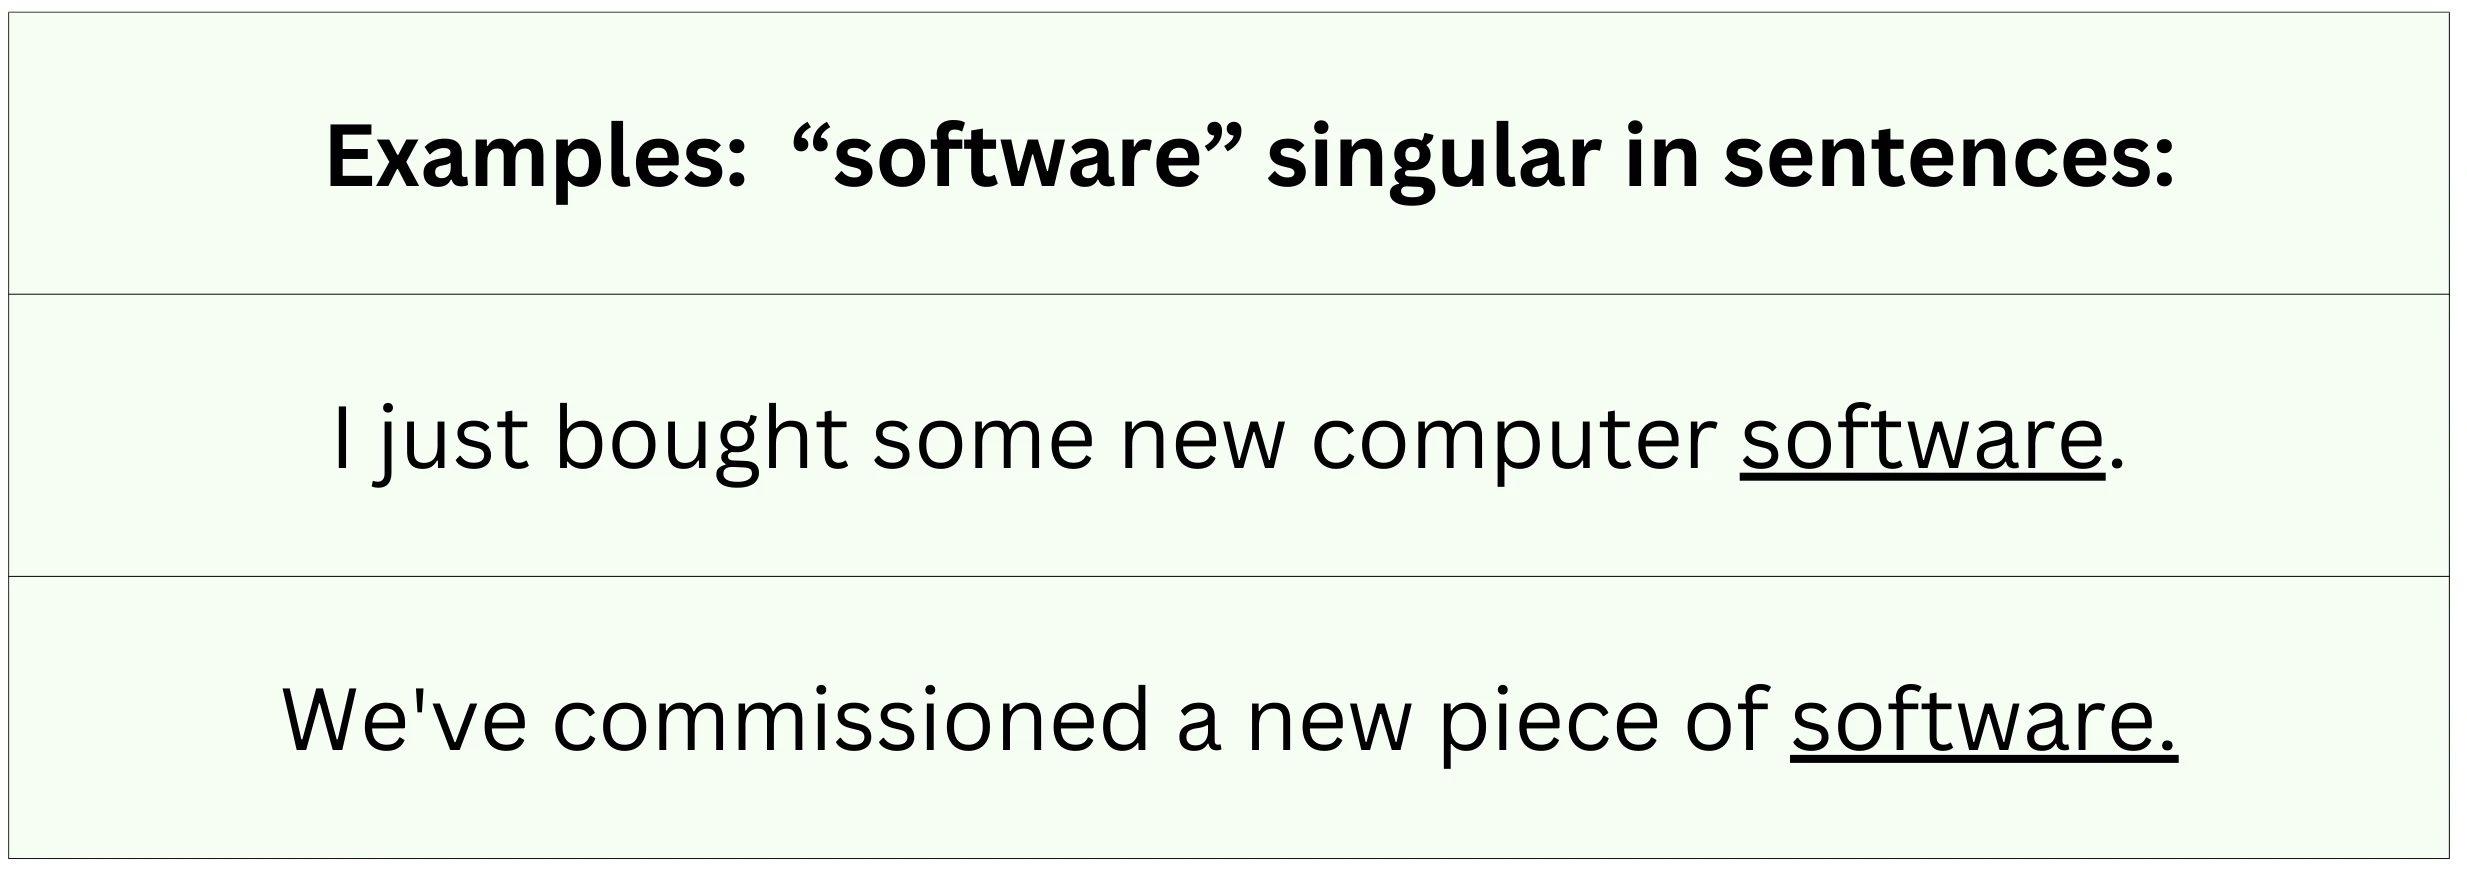 "Software" used as a singular noun in sentence examples.